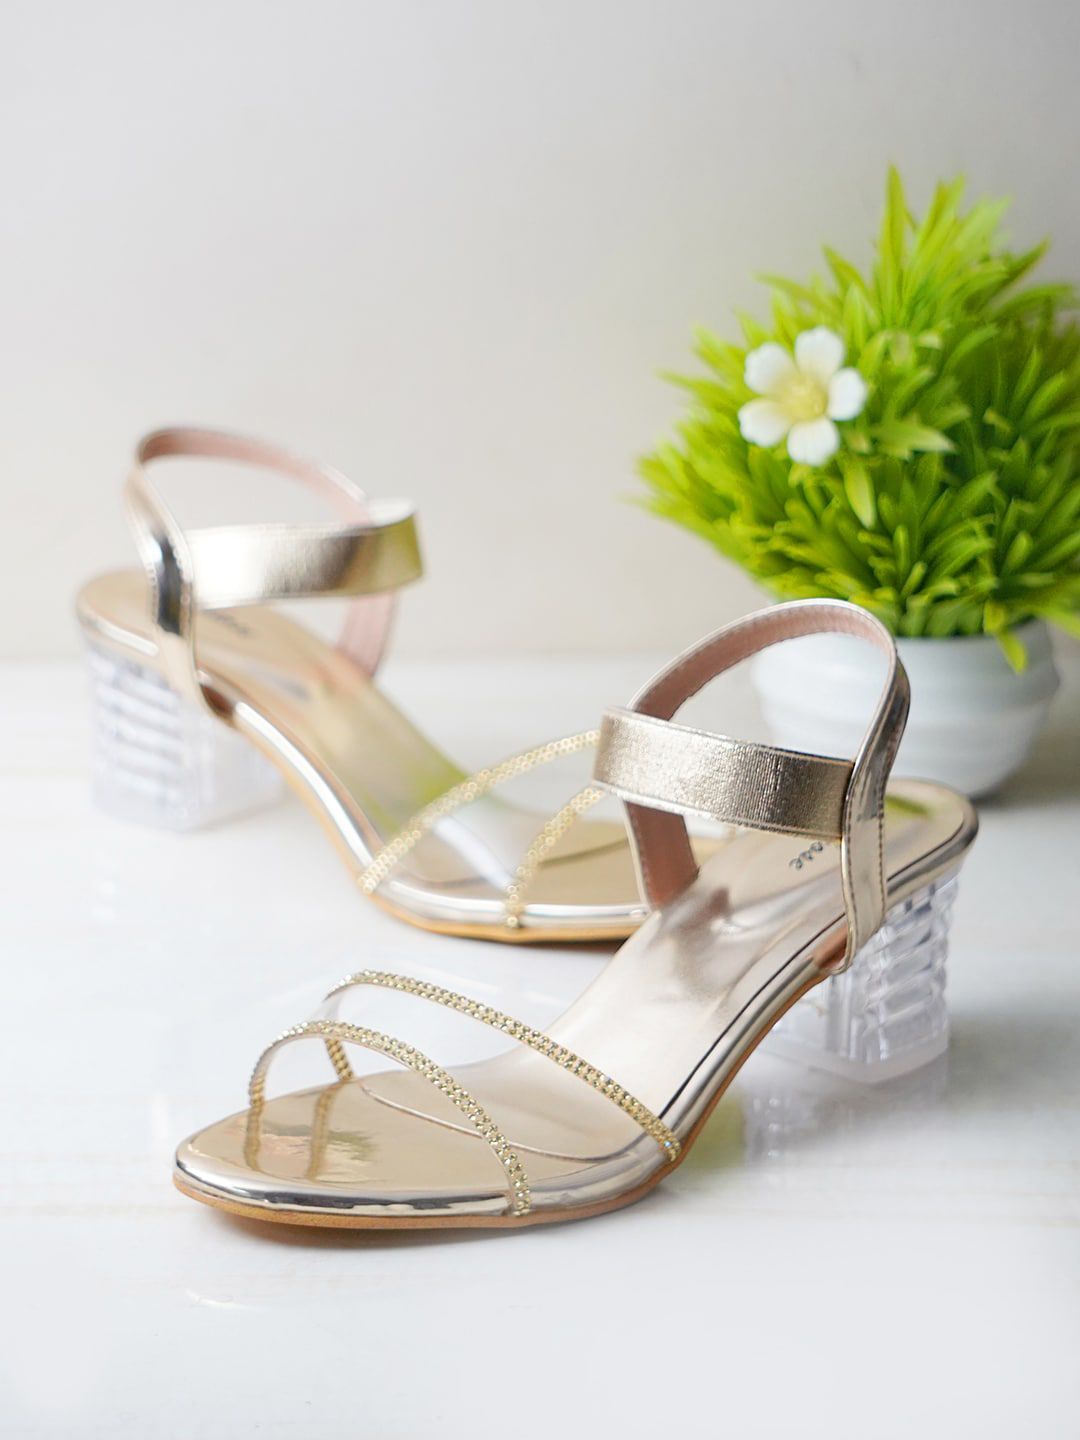 Sanhose Gold-Toned Women Embellished Party transparent Block Sandals with Buckles Price in India